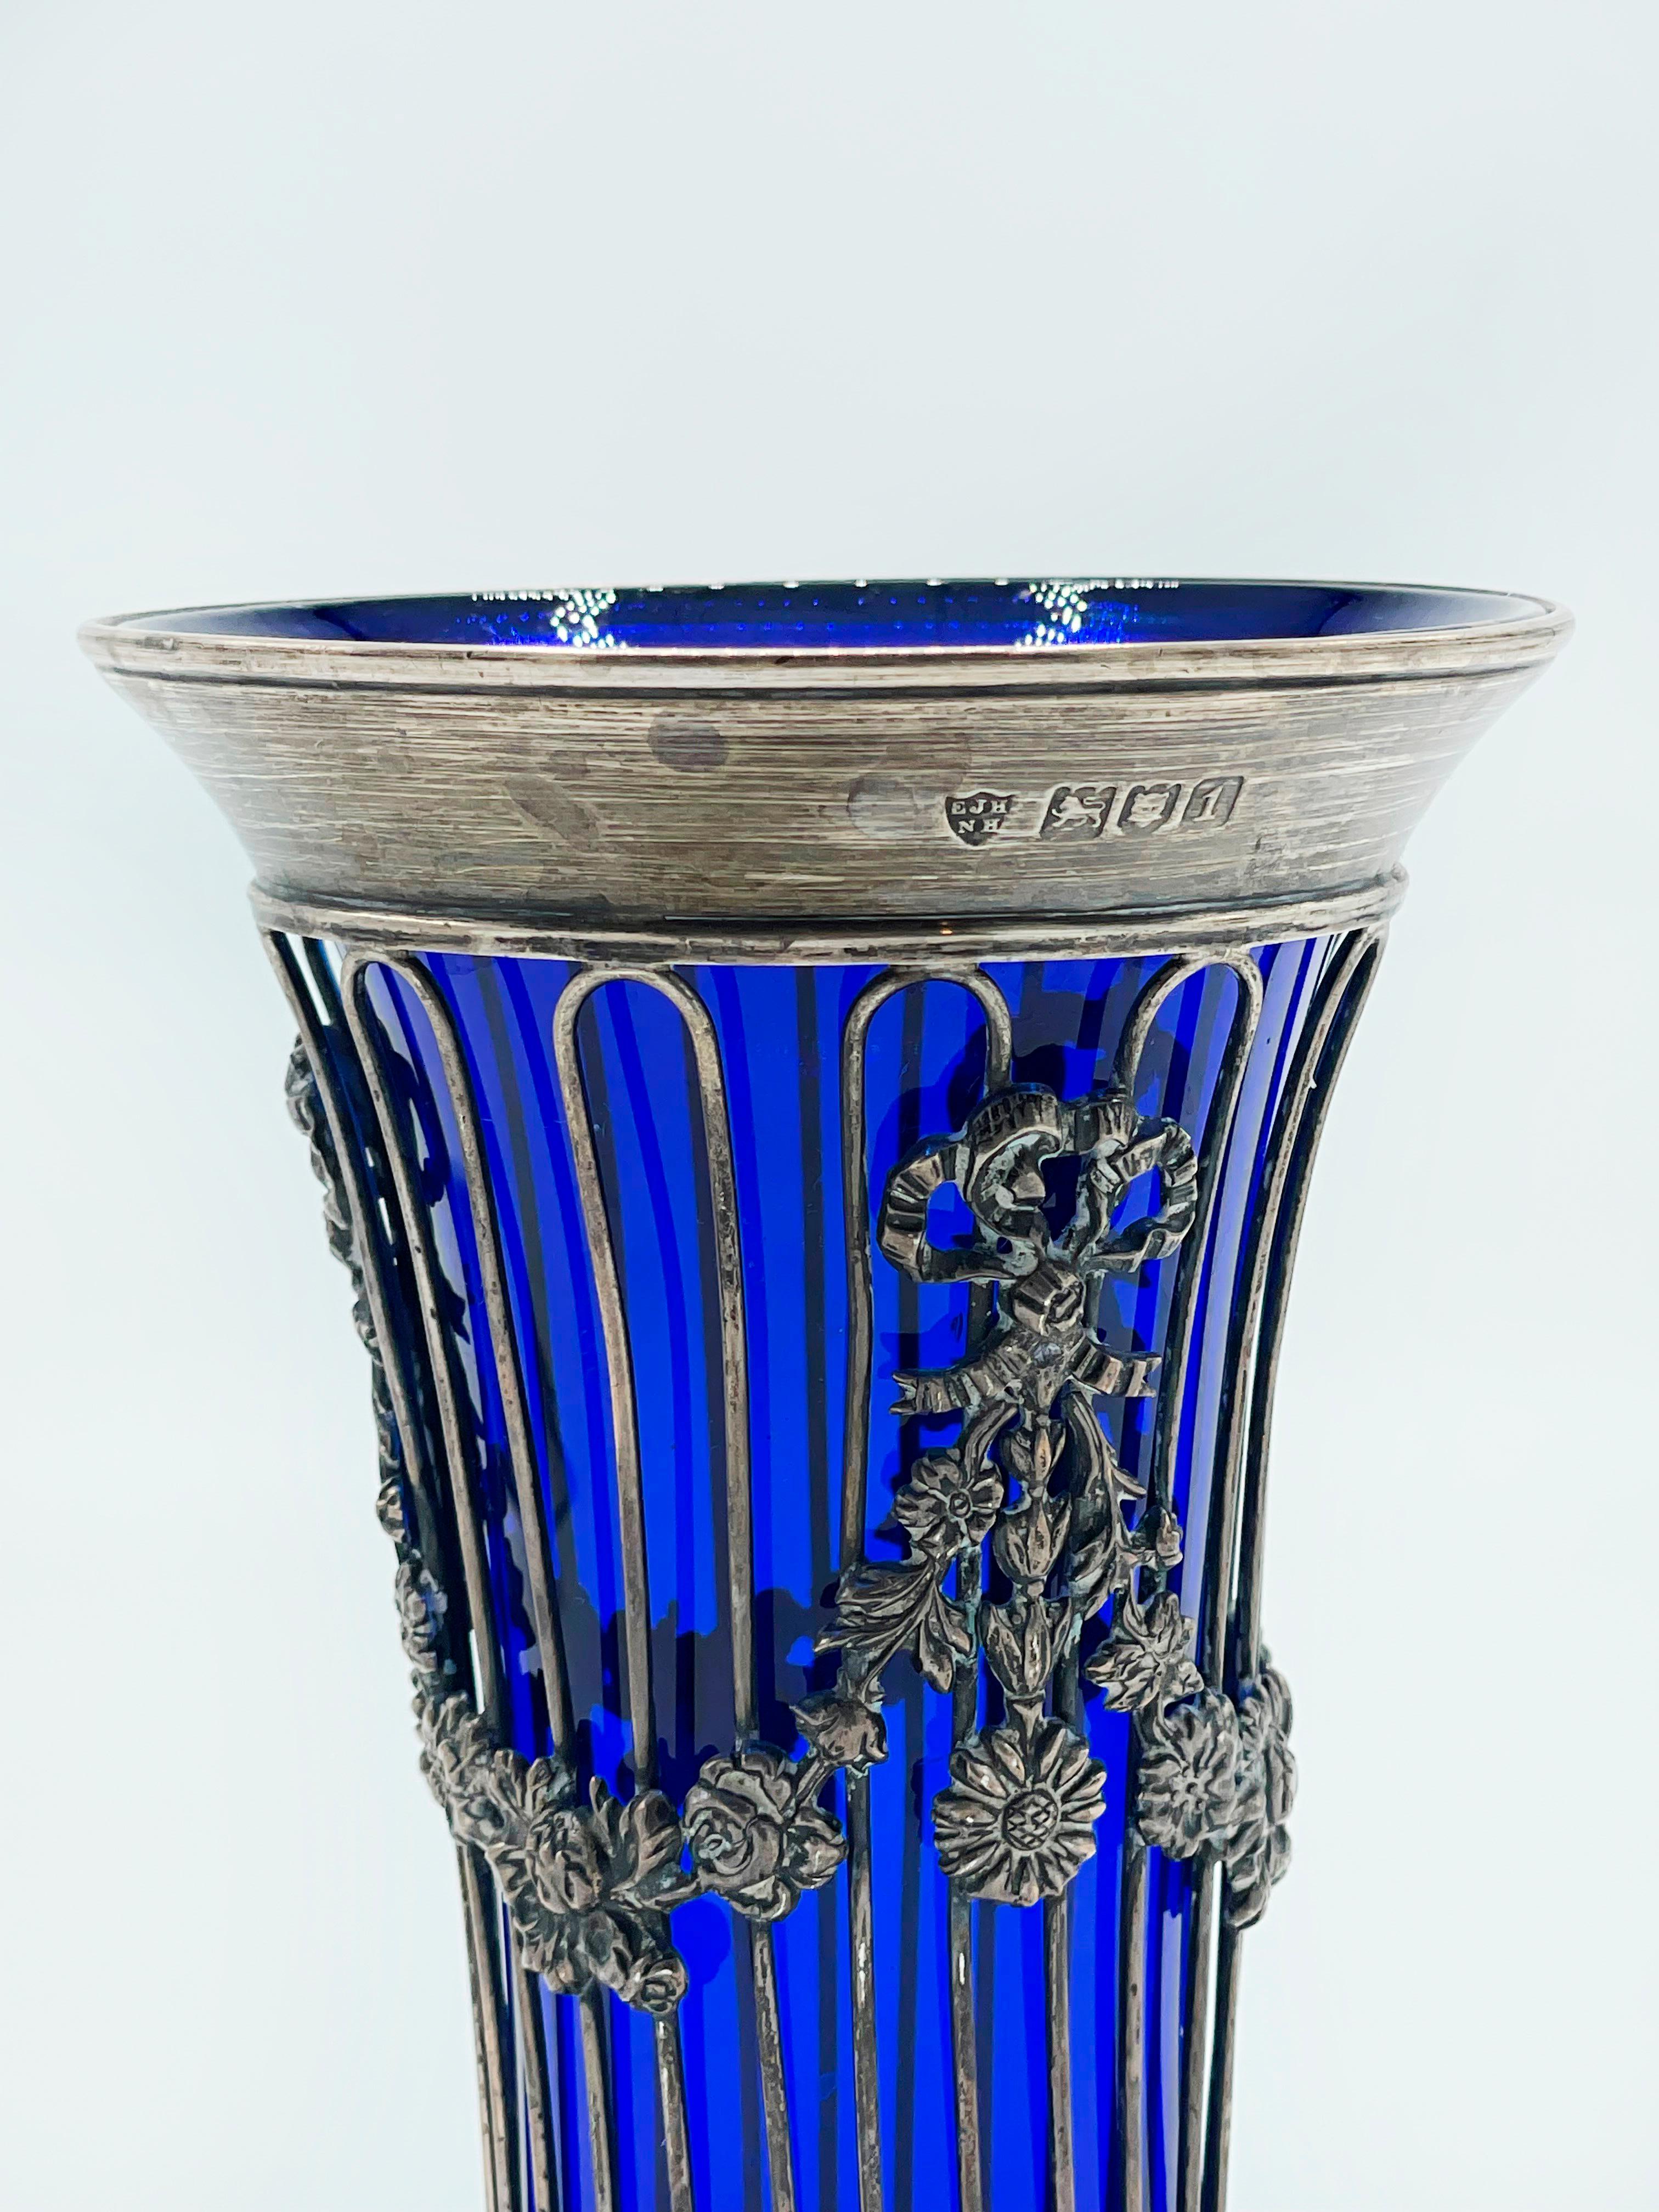 William Hutton Sheffield Sterling Silver & Cobalt Blue Glass insetç

This Lovely piece is in good condition. It is striking and very decorative for any space!

Measures:
17 centimeters high
9 centimeters diameter
